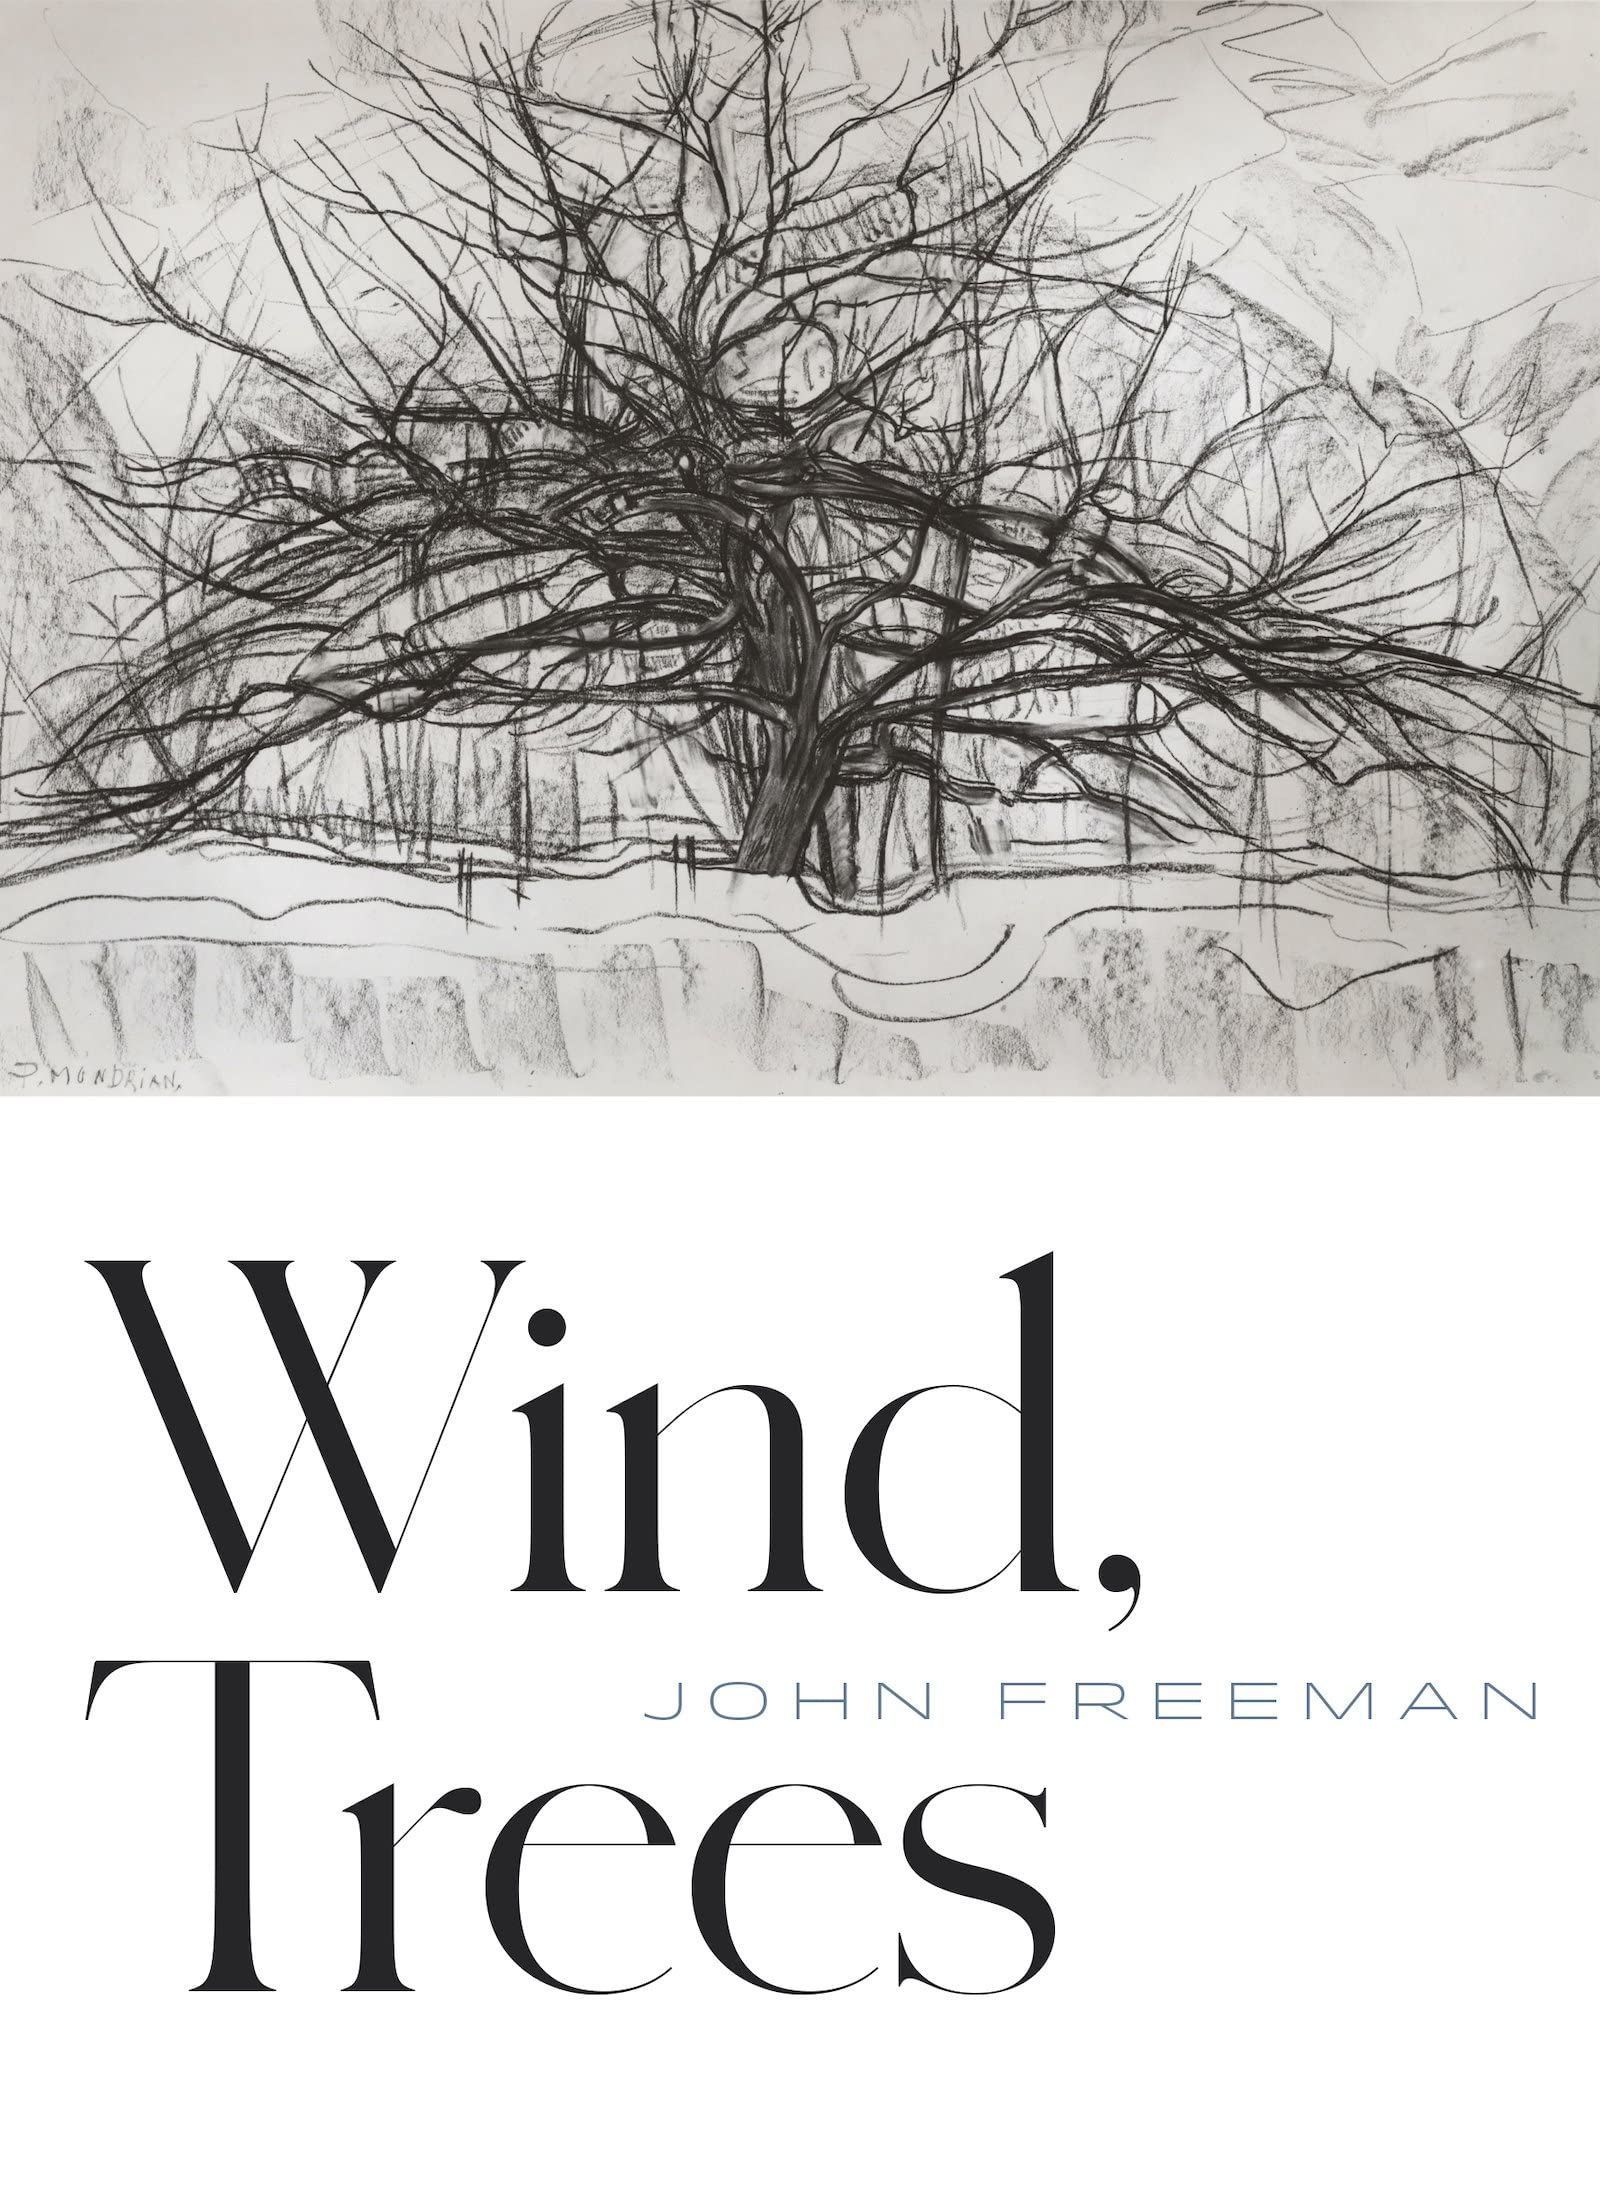 Maybe One Day I Will Learn How to Live: On John Freeman’s “Wind, Trees”